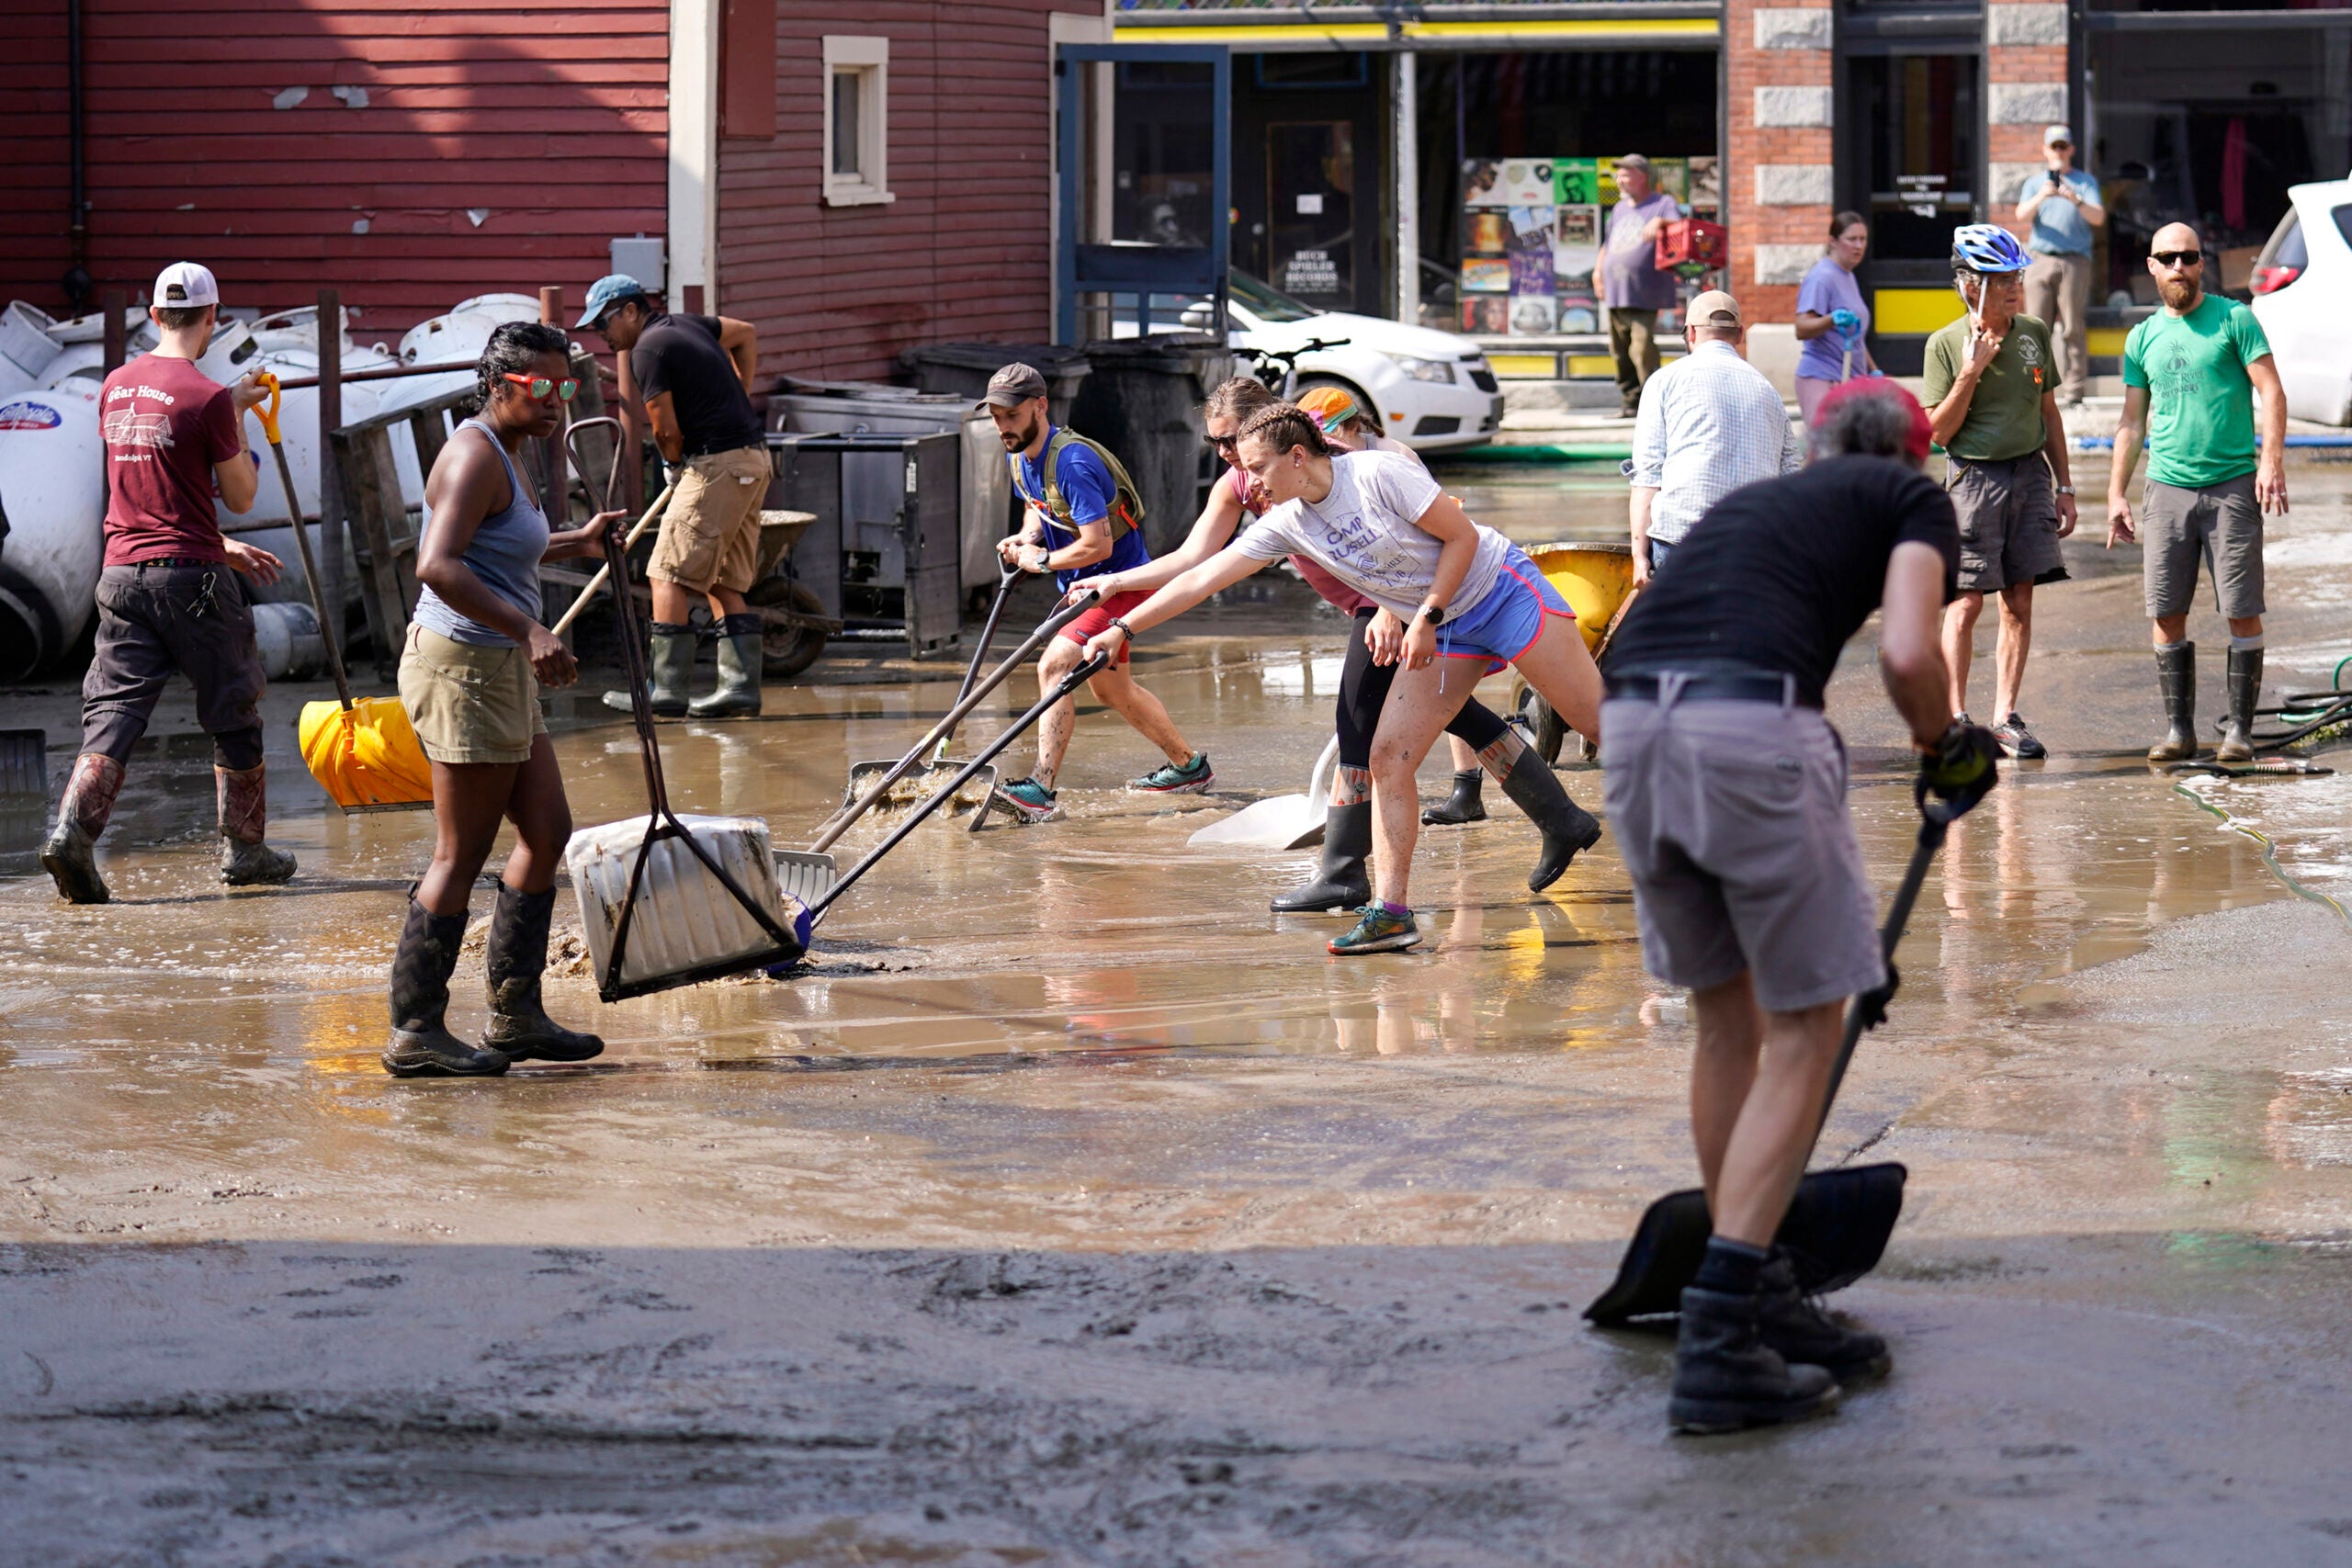 Volunteers clean up a downtown parking area on the banks of the Winooski River.